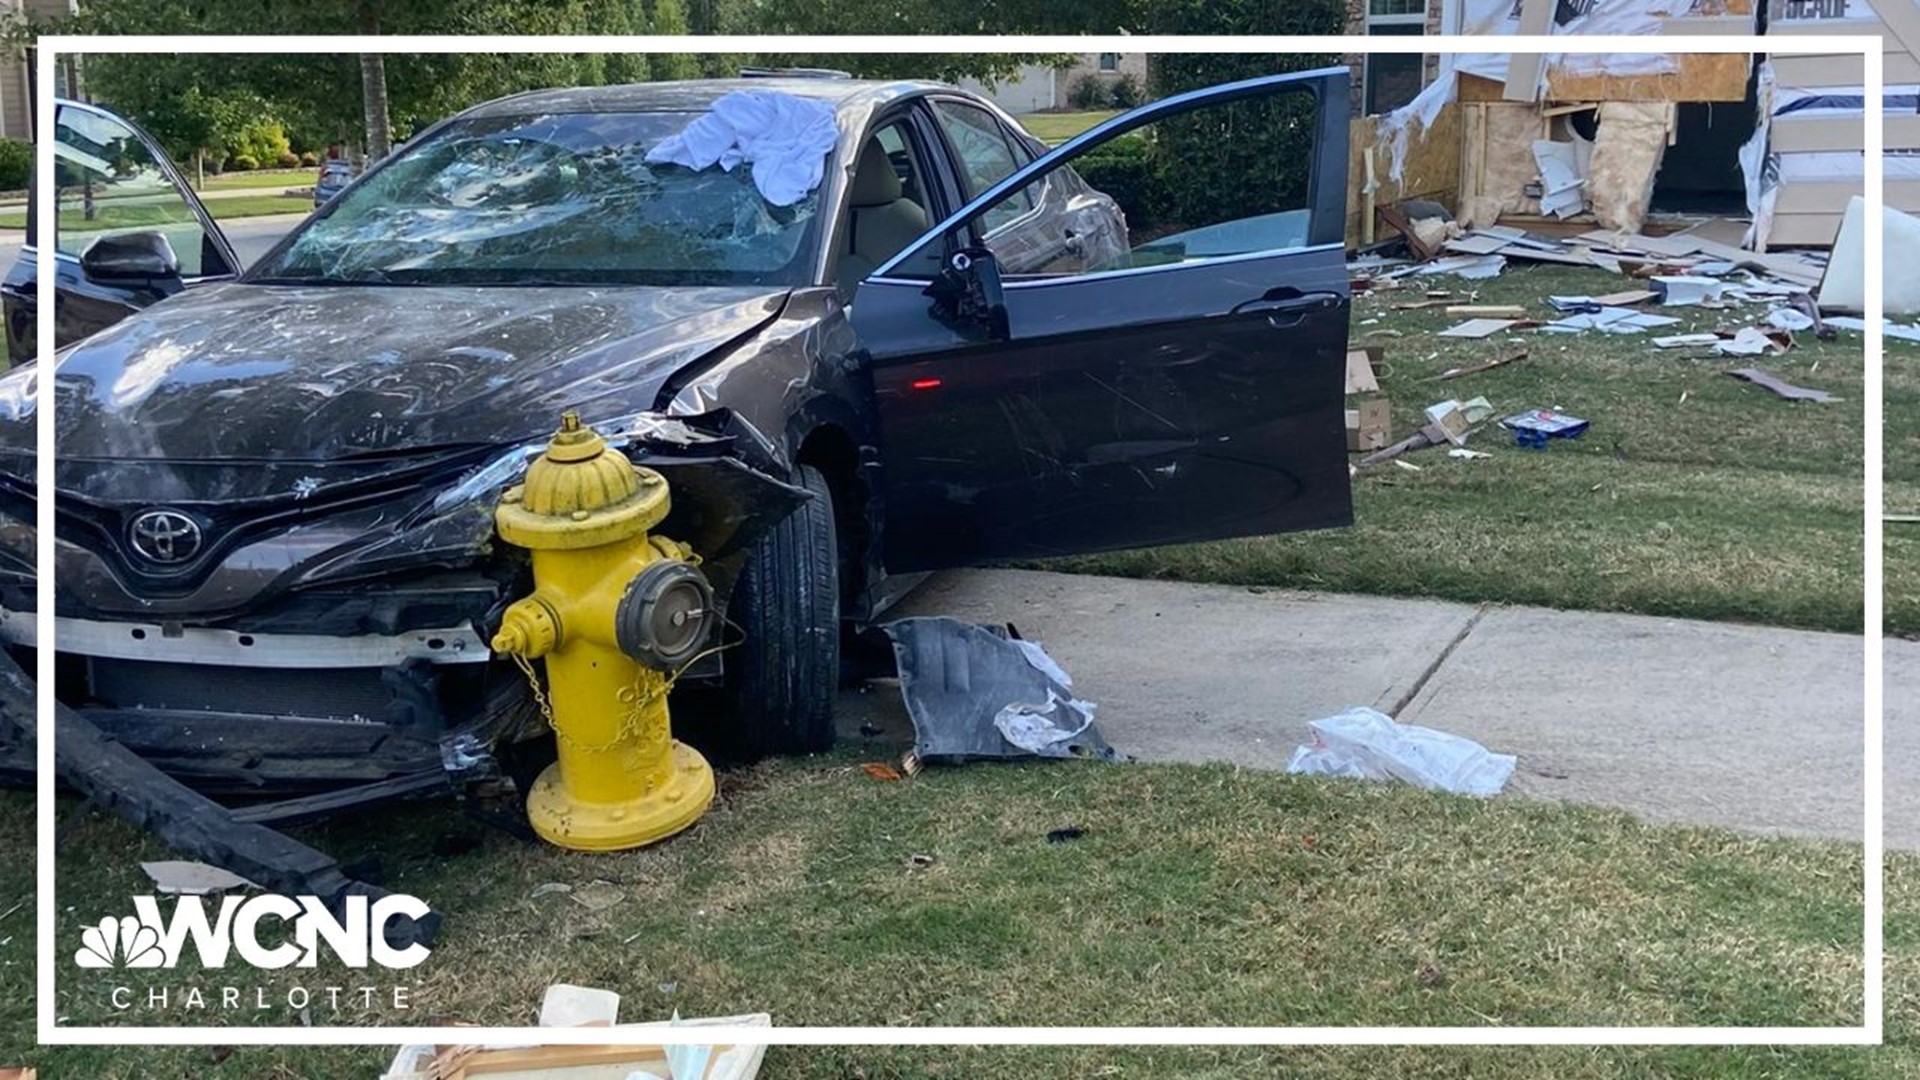 A driver was taken to the hospital after crashing into a house in Huntersville on Sunday afternoon, firefighters said.